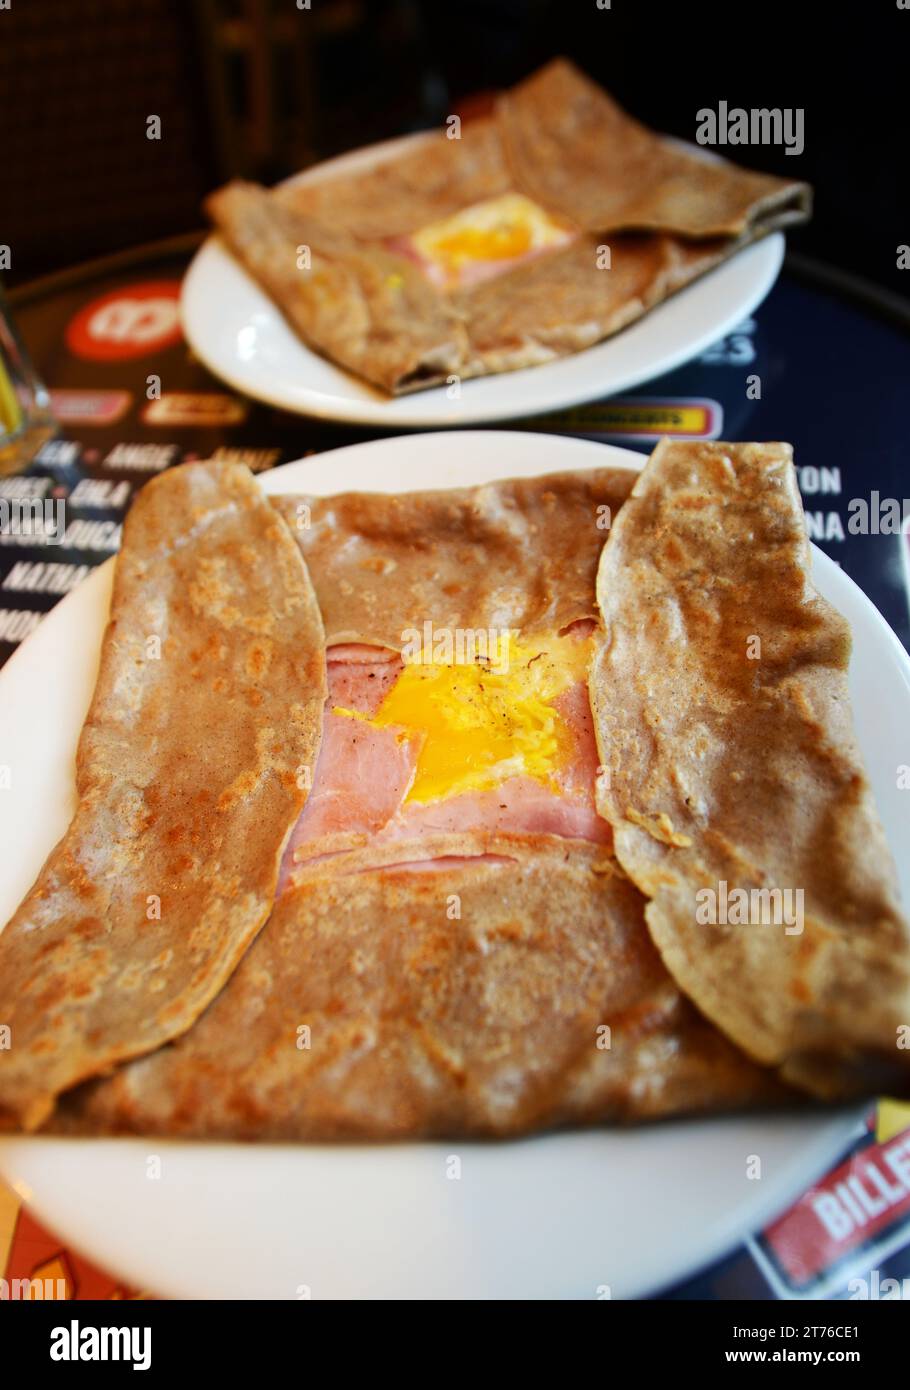 Galette de sarrasin - a traditional savory buckwheat pancake from Brittany, France. Stock Photo